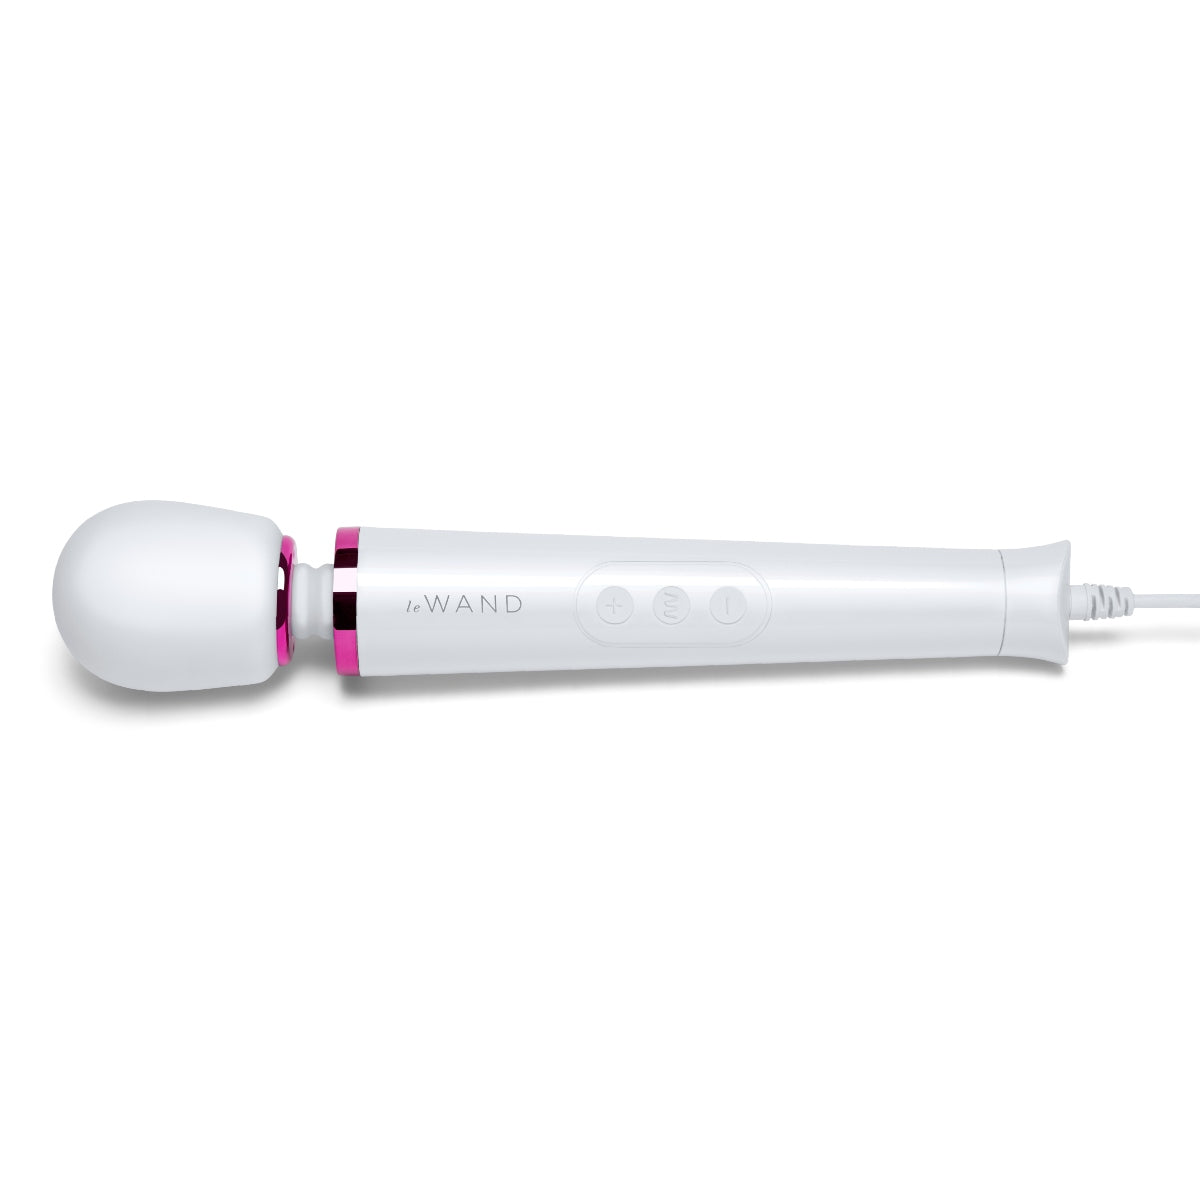 Le Wand | Powerful Petite Plug In Vibrating Massager - White